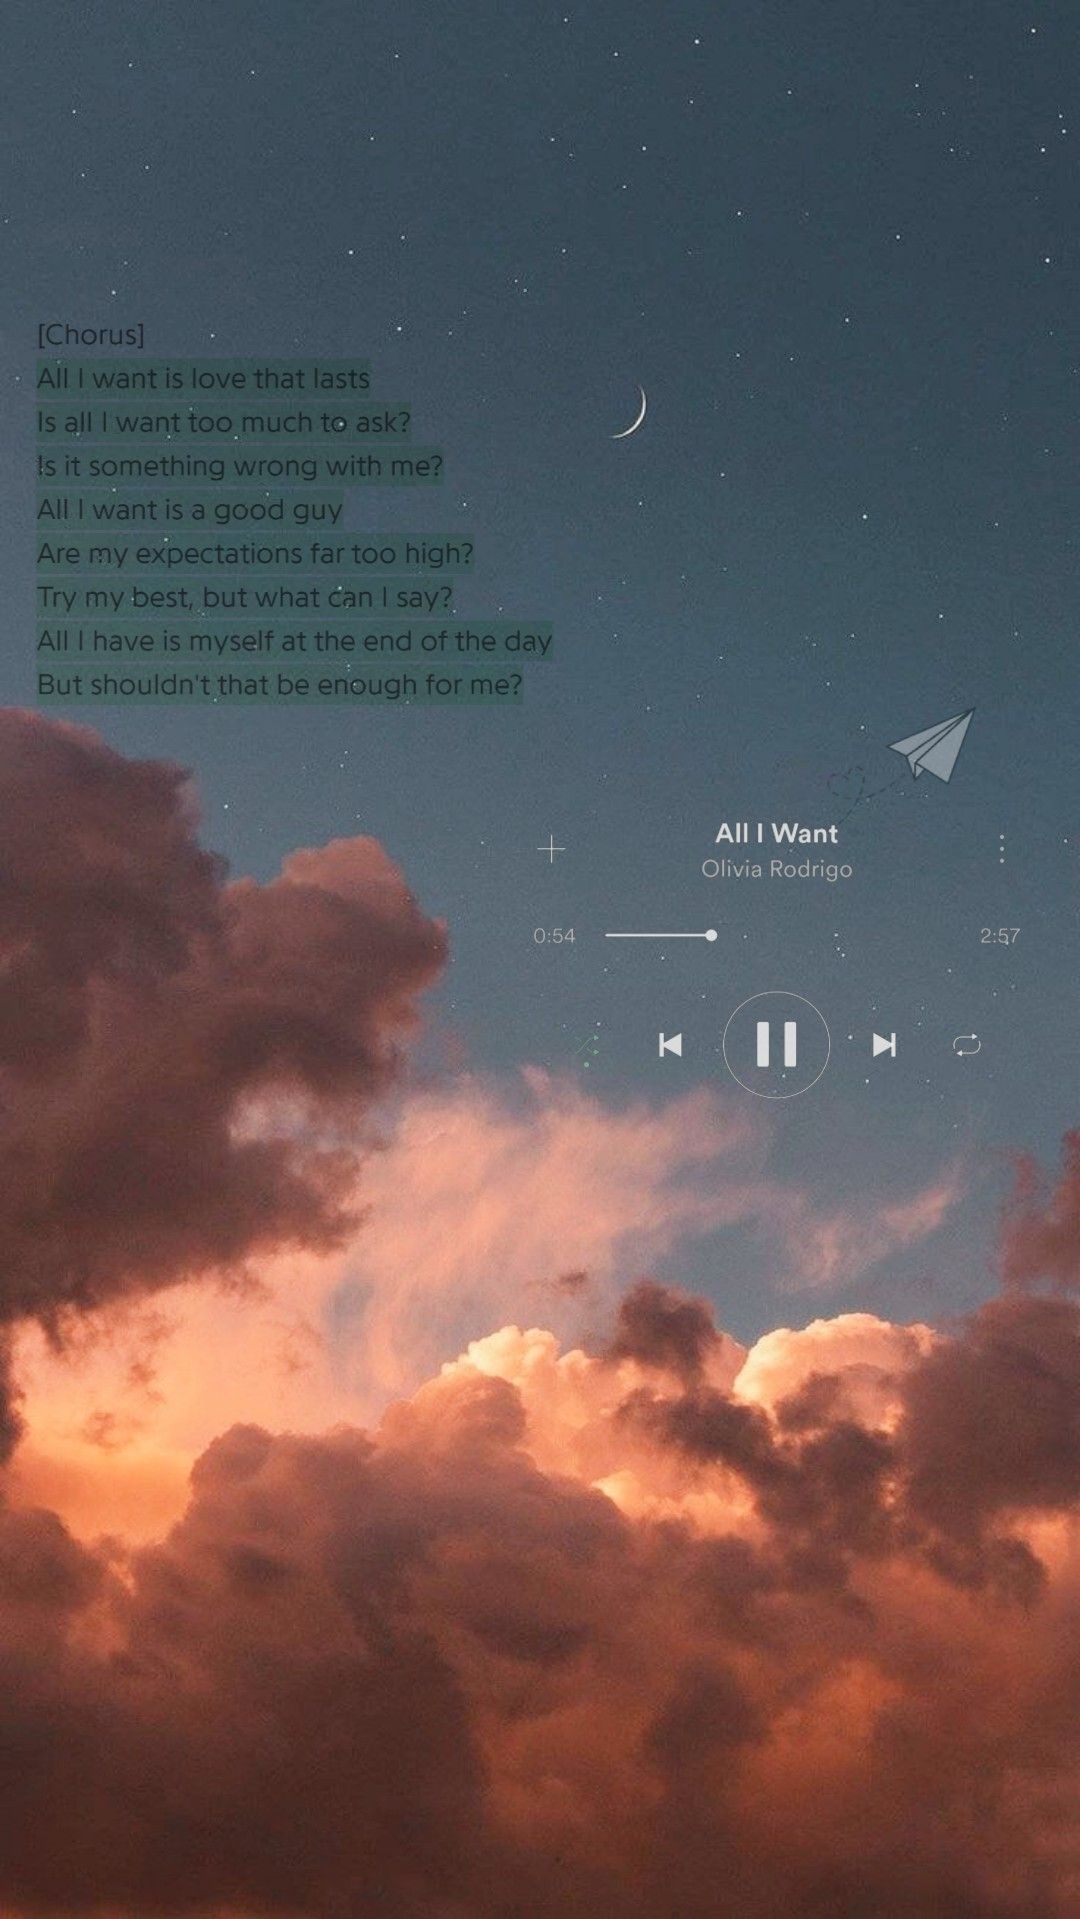 Aesthetic wallpaper of the sky with clouds and a plane flying by. - Music, Spotify